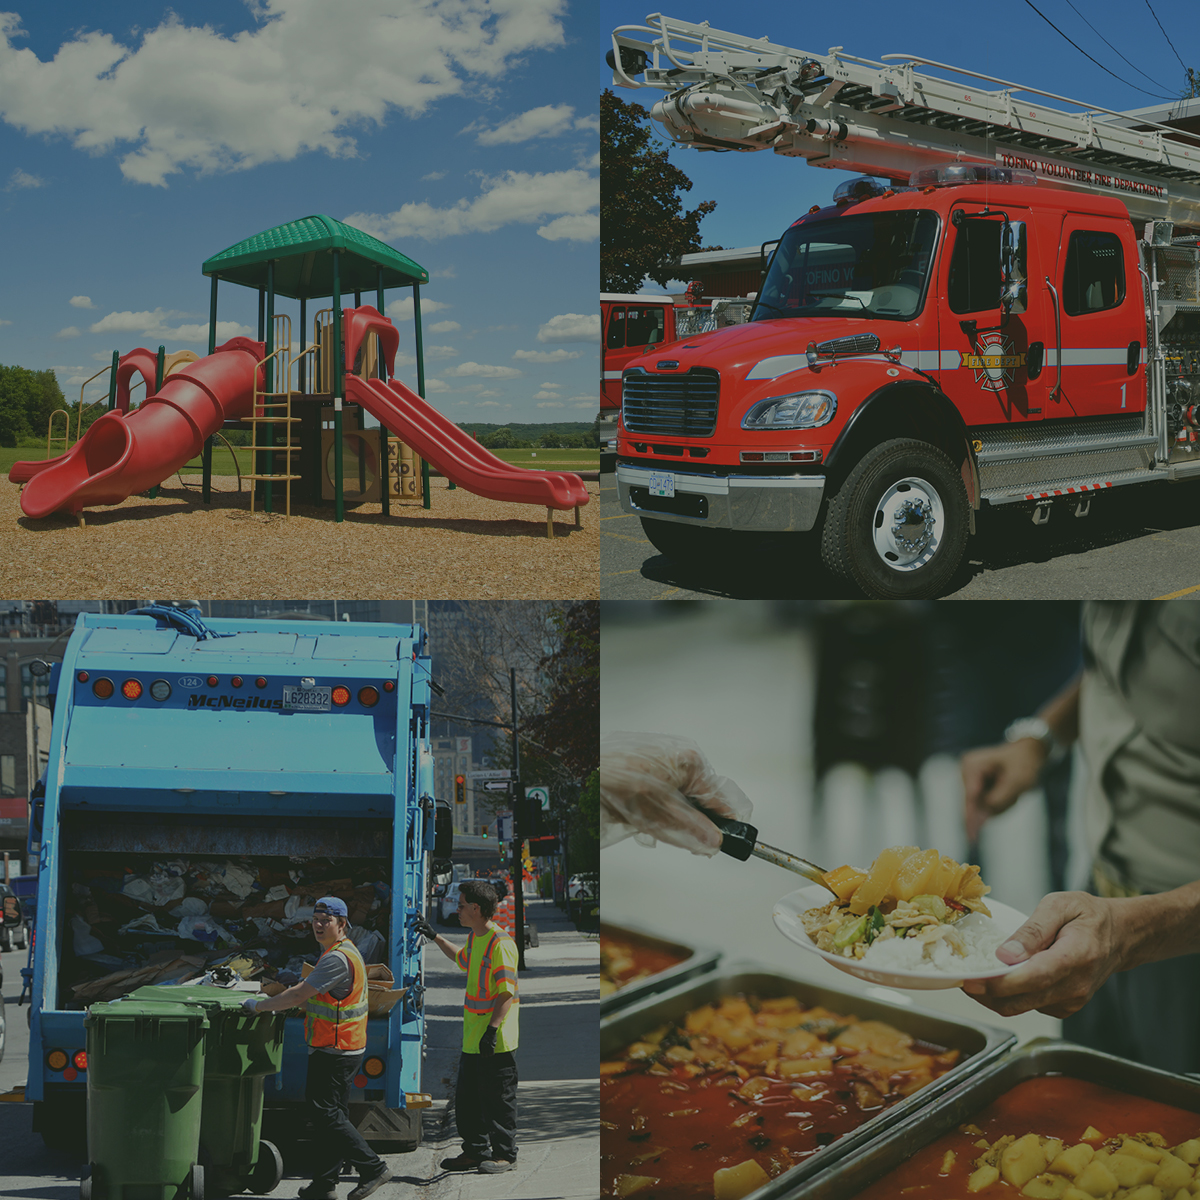 Collage of images of community services such as feeding the community, picking up garbage, fire truck and kids playground.